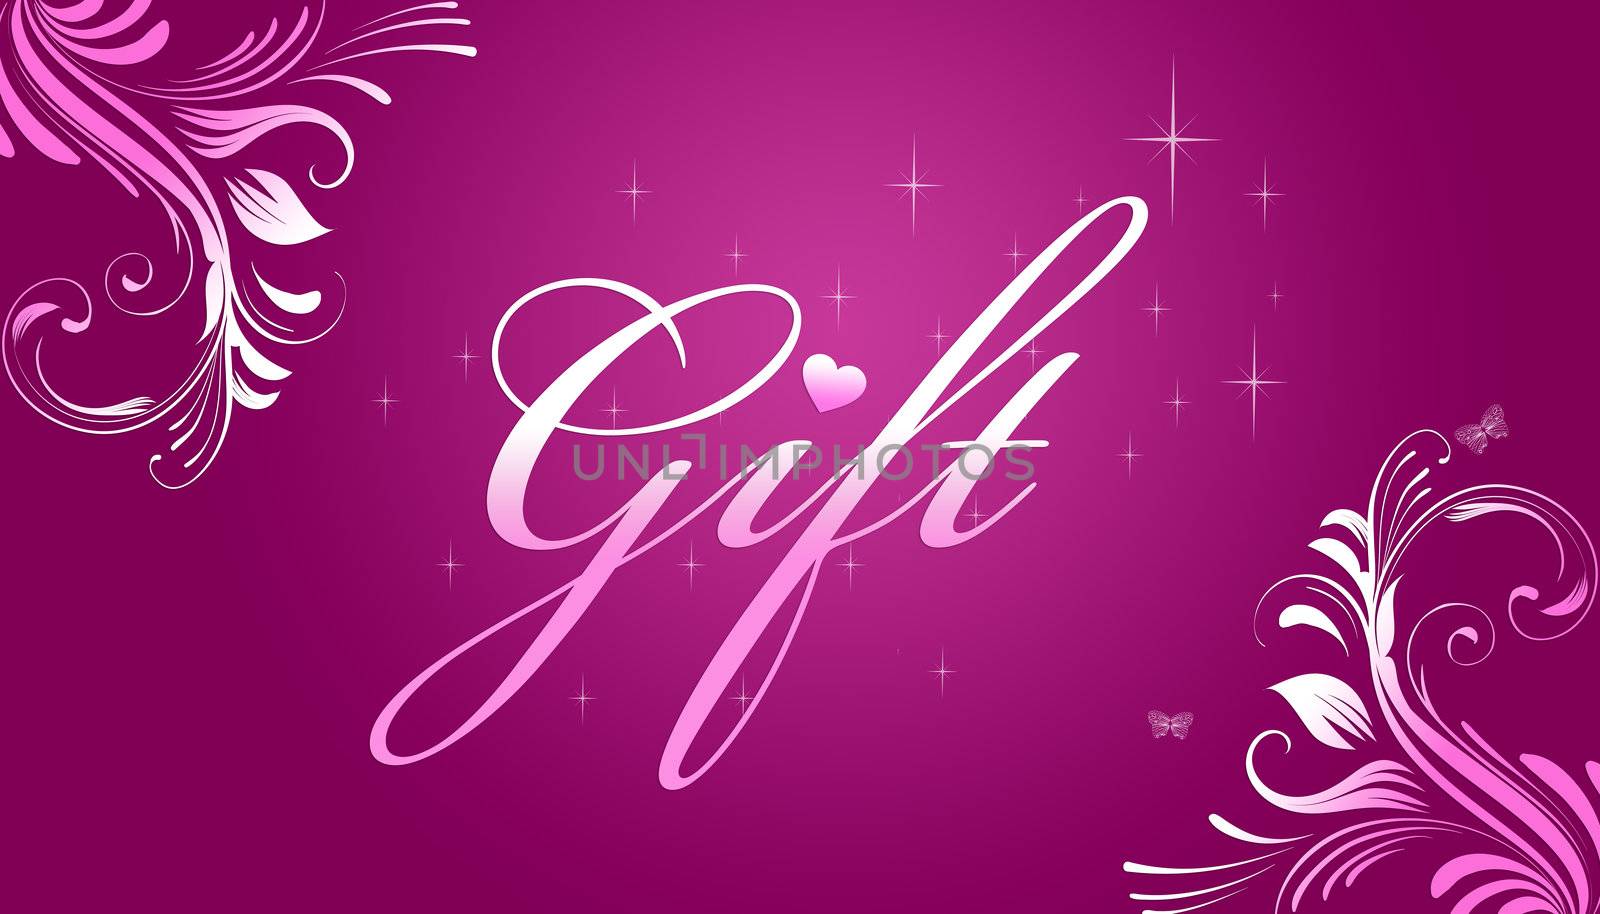 High resolution promotional gift certificate grahic with floral elements on pink background.  